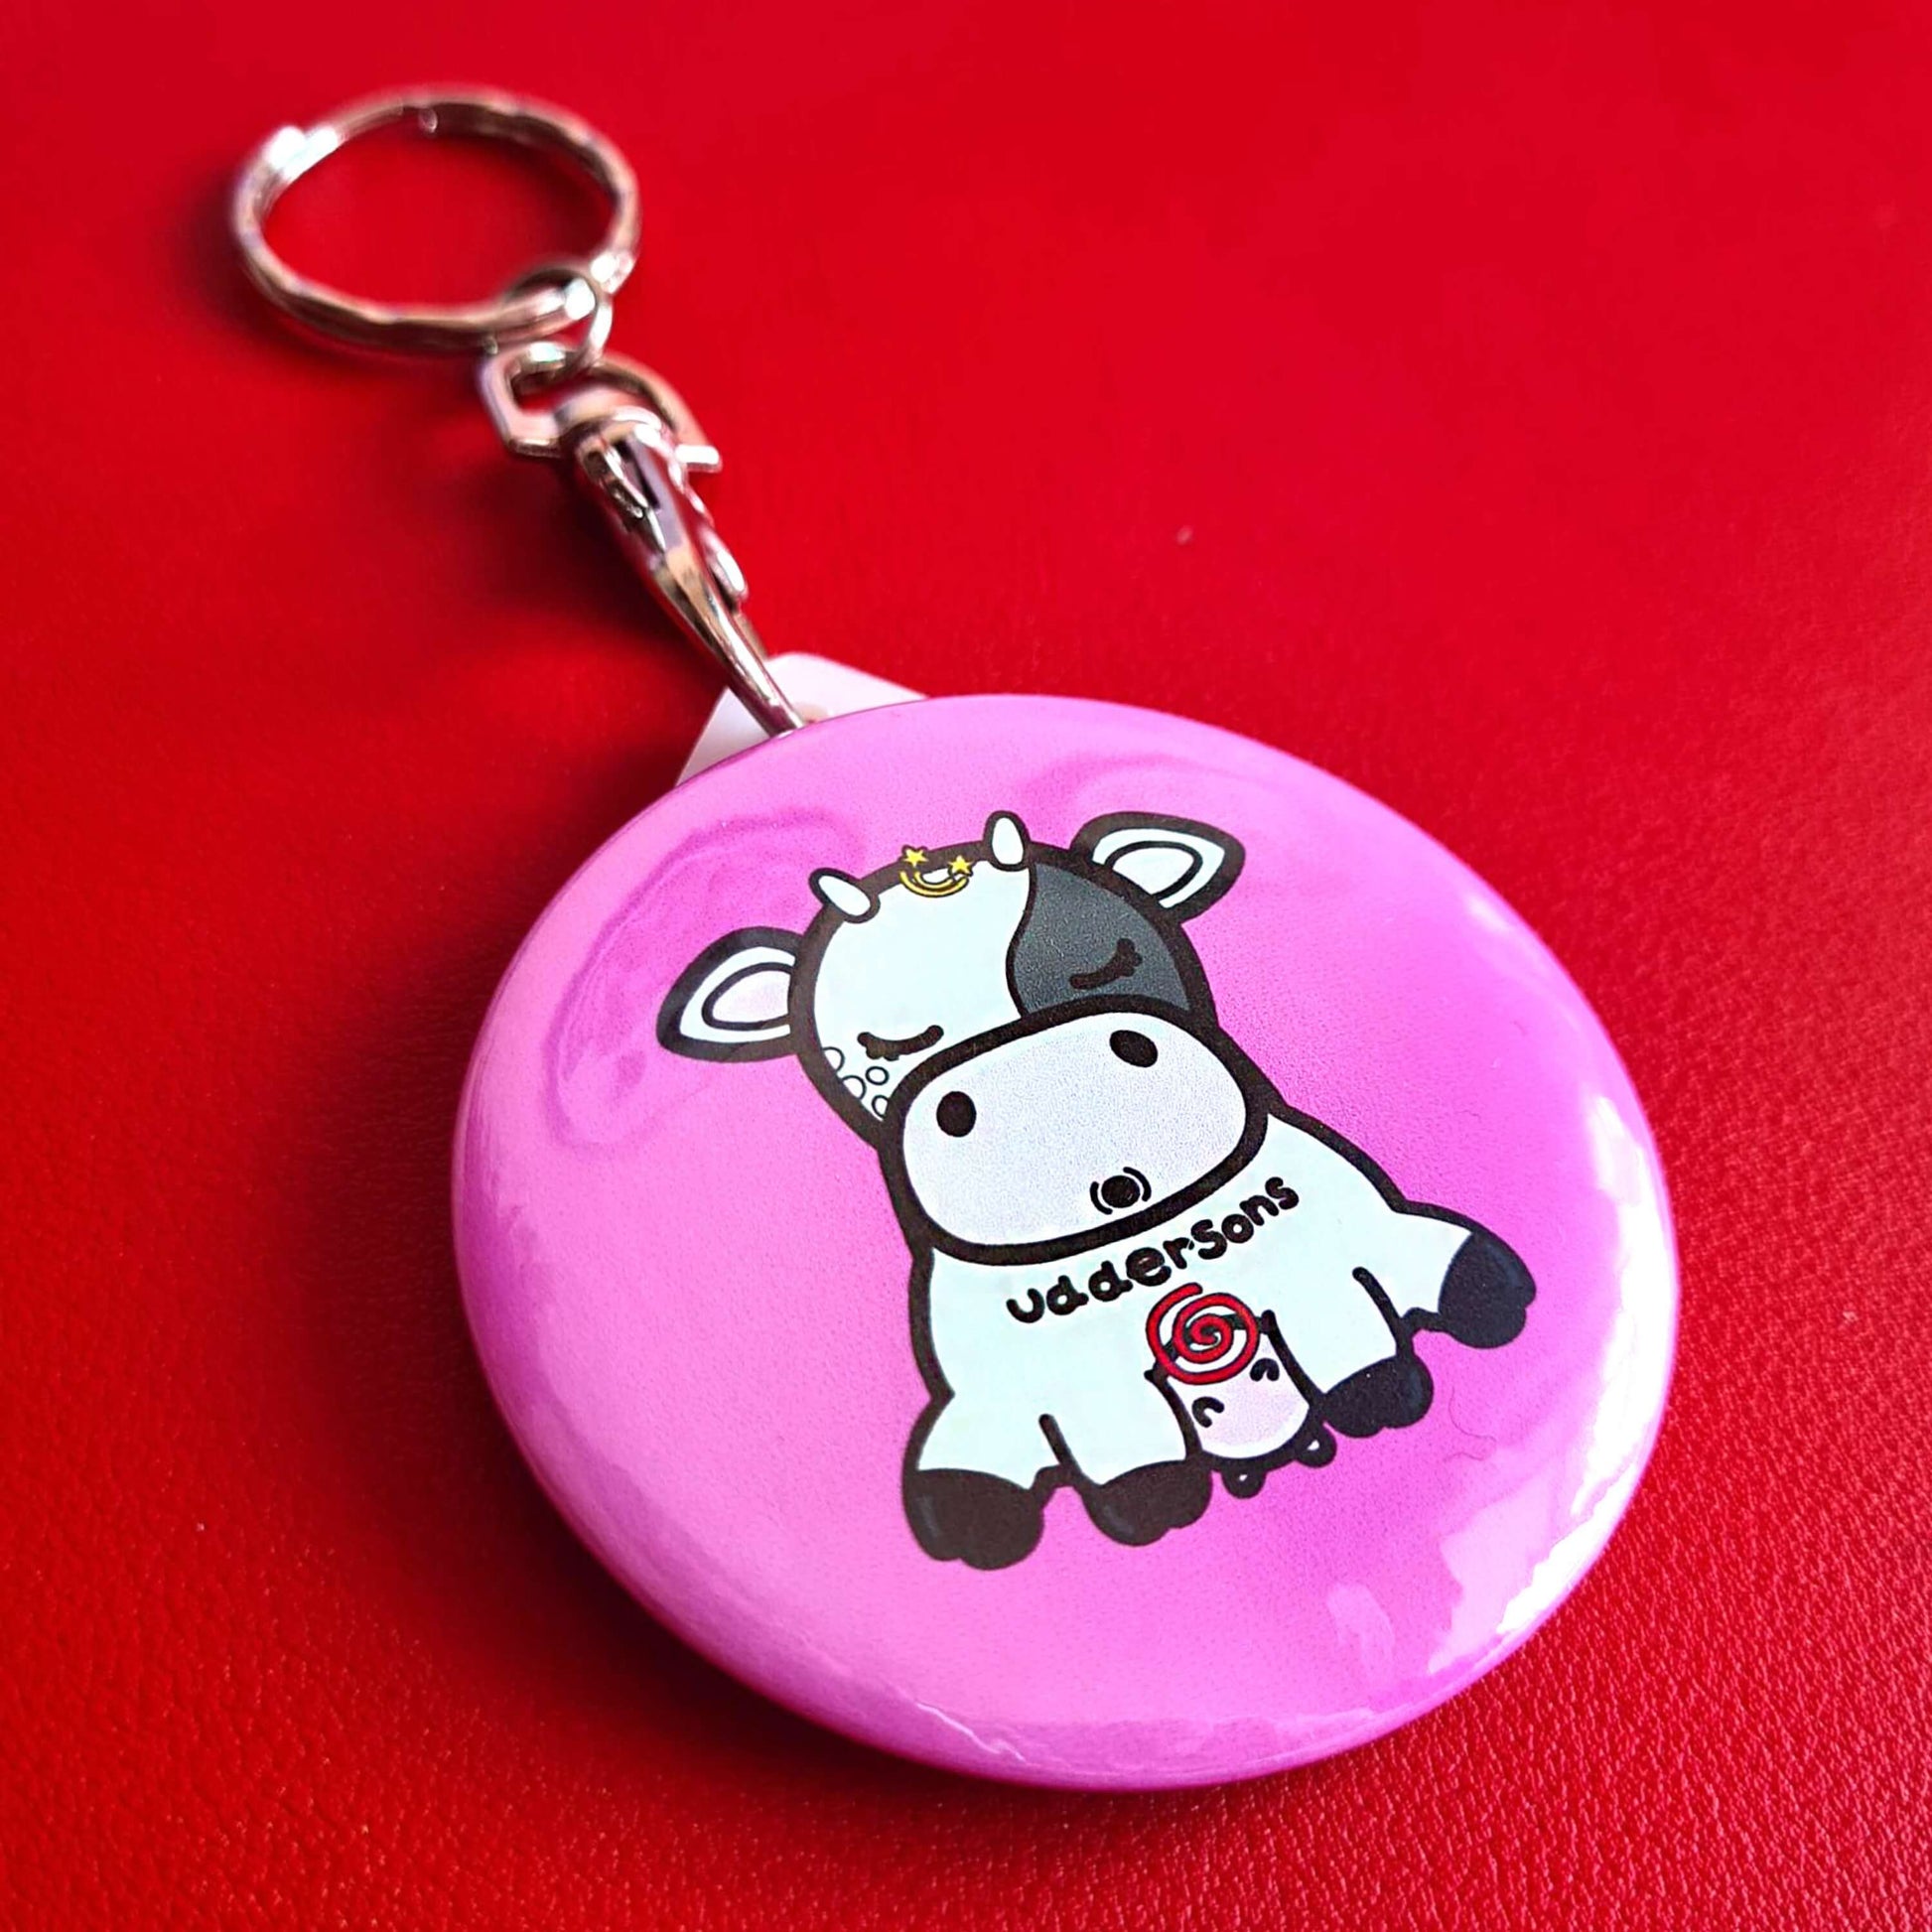 The Uddersons Cow Keyring - Addisons Disease on a red background. The silver clip pink plastic circular keyring features a tired looking black and white cow with a stars above its head, a red swirl on its belly and black text across reading 'uddersons'. The hand drawn design is raising awareness for addisons disease.